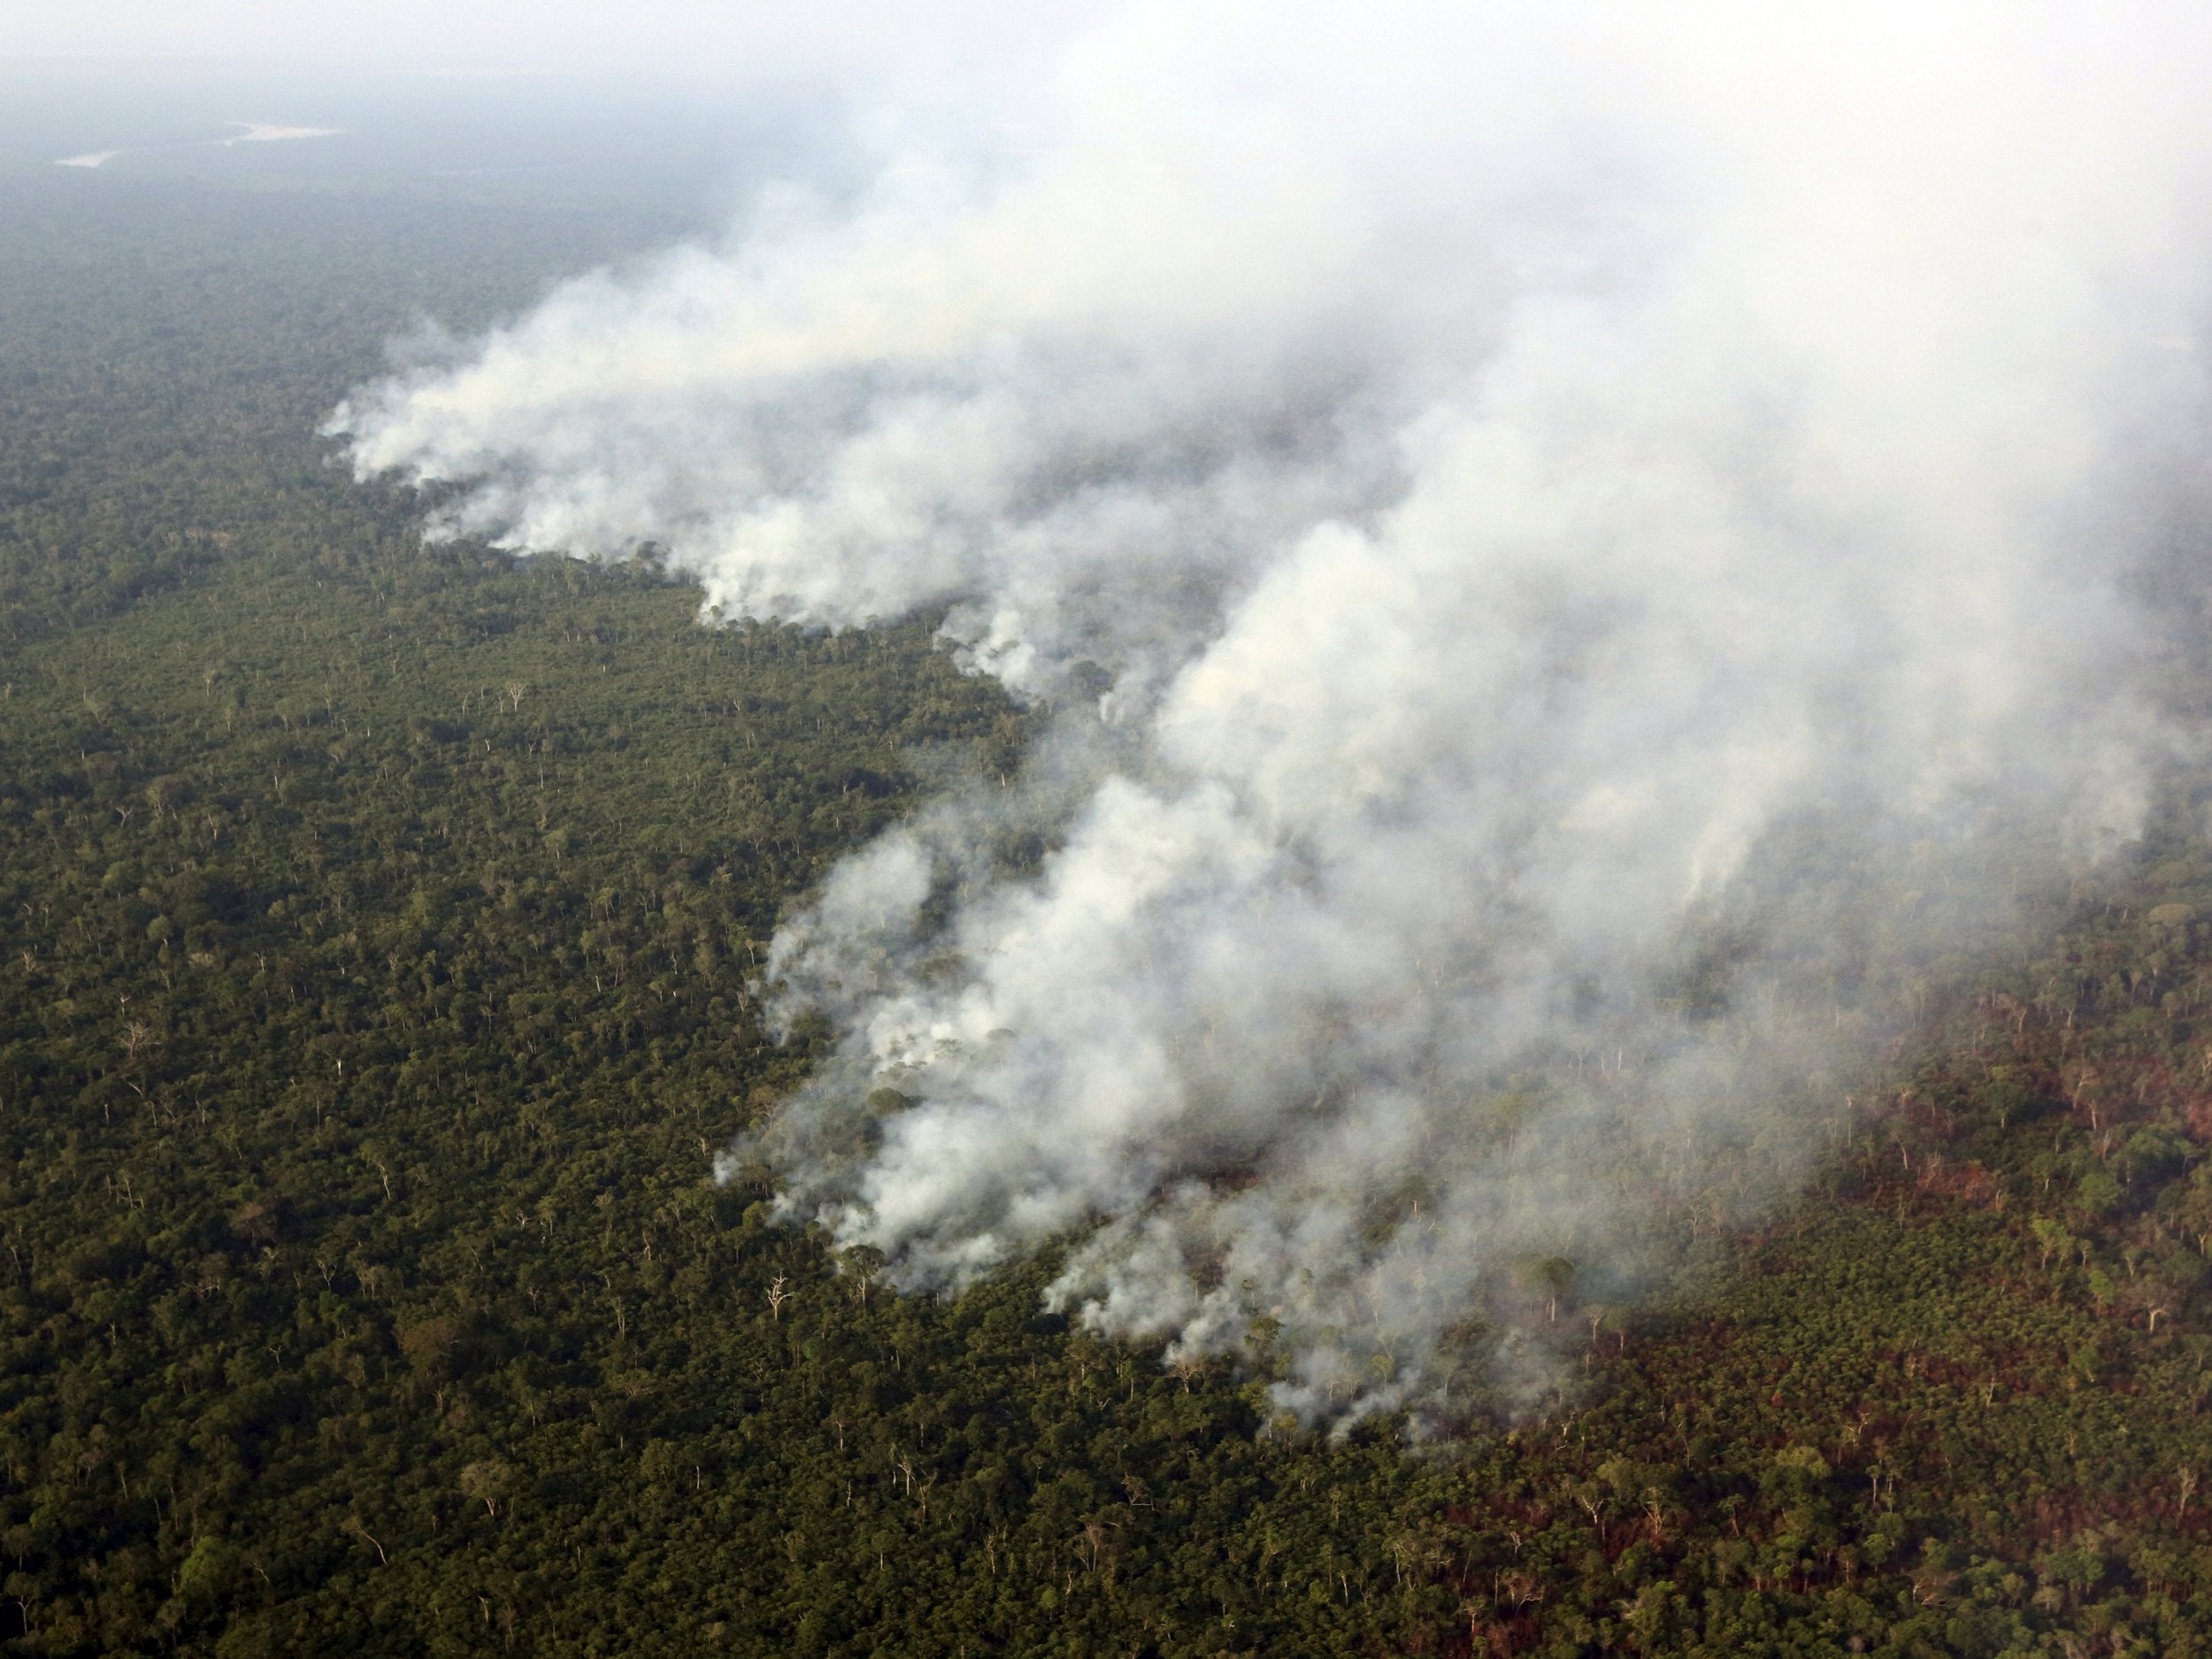 Smoke billows from a fire in the Amazon rainforest in Brazil. About 30 per cent of all tropical rainforest losses last year were in the country